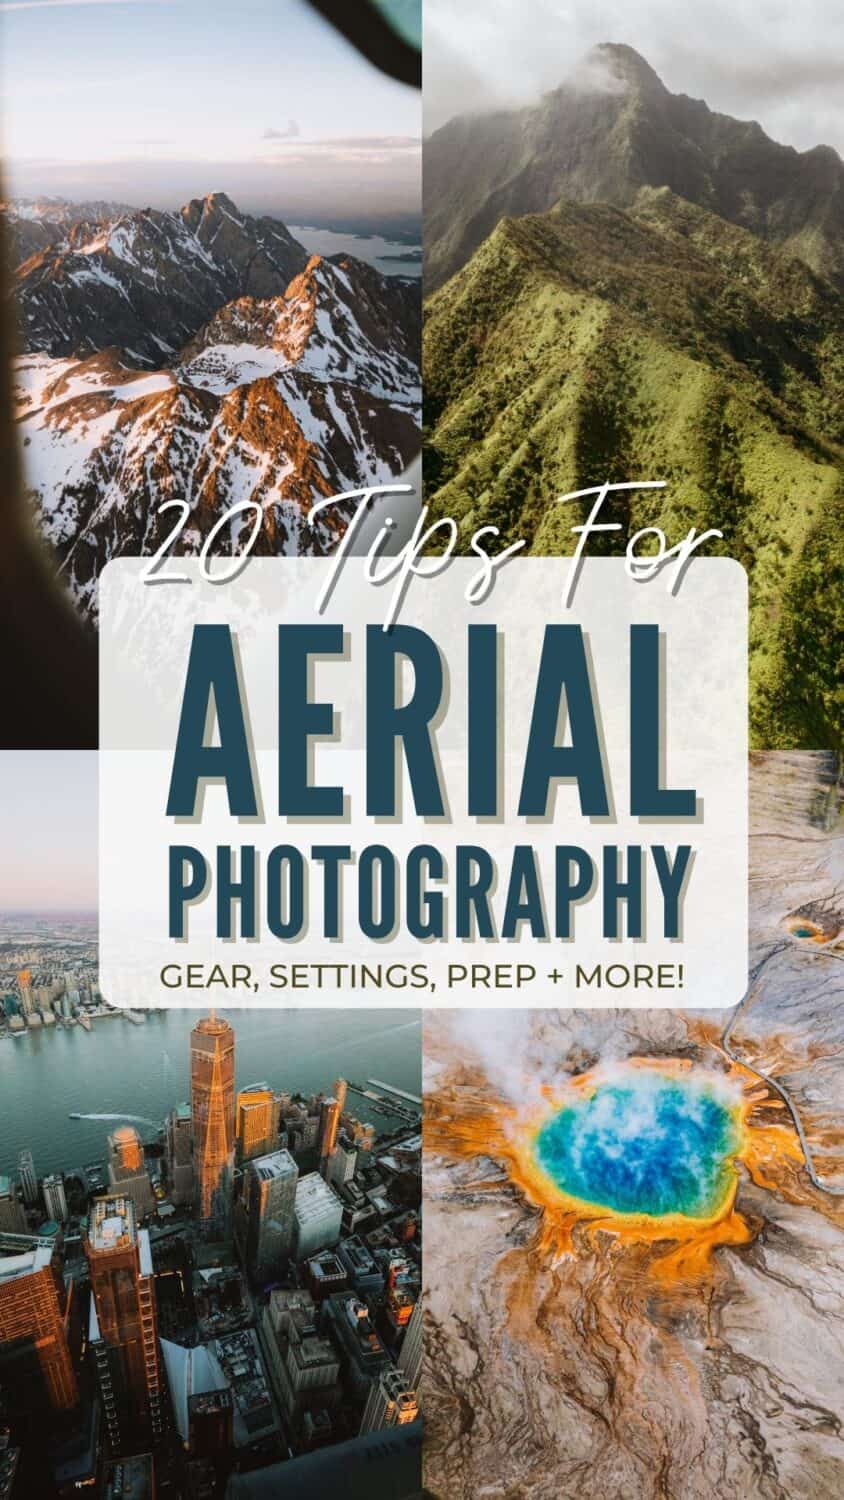 Getting ready for your first helicopter photography tour? We're sharing the best aerial photography tips and tricks, and gear recommendations from B&H Photo, and camera settings for the best aerial photos! #aerialphotography #photography #photos #helicopterride #mountains #cityscapes #newyork #travel #adventure #plane #nature #photography